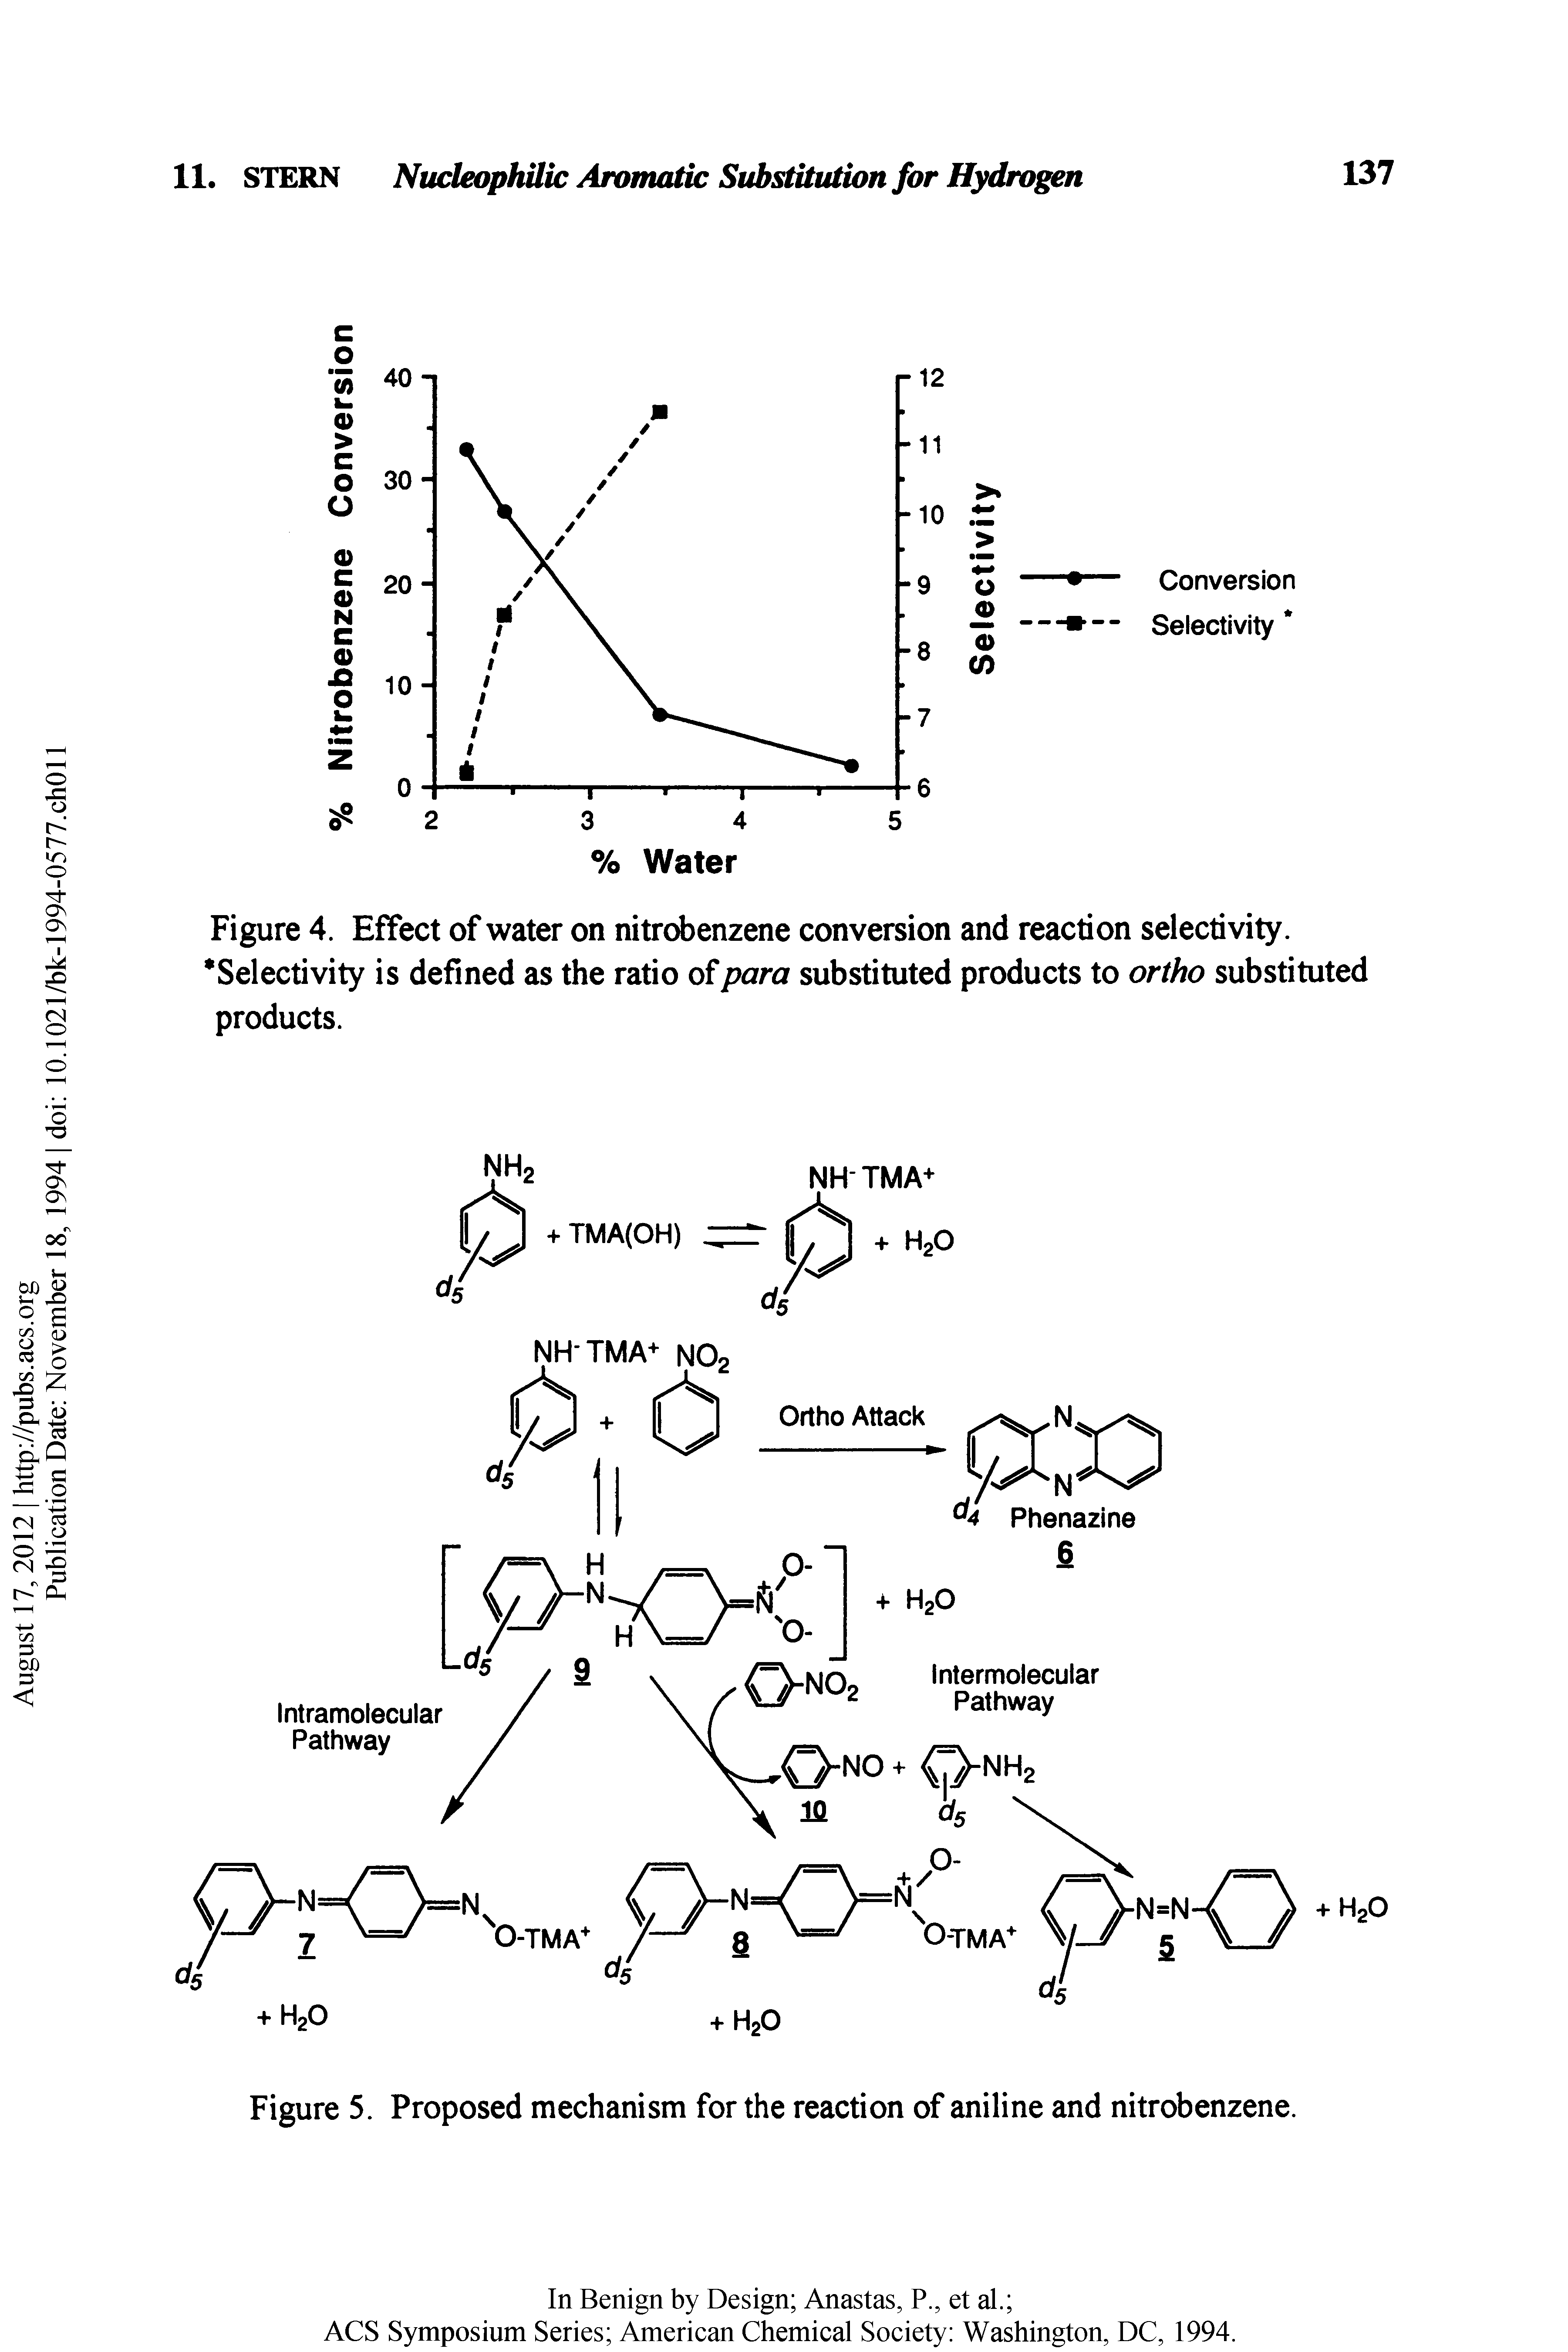 Figure 4. Effect of water on nitrobenzene conversion and reaction selectivity. Selectivity is defined as the ratio of para substituted products to ortho substituted products.